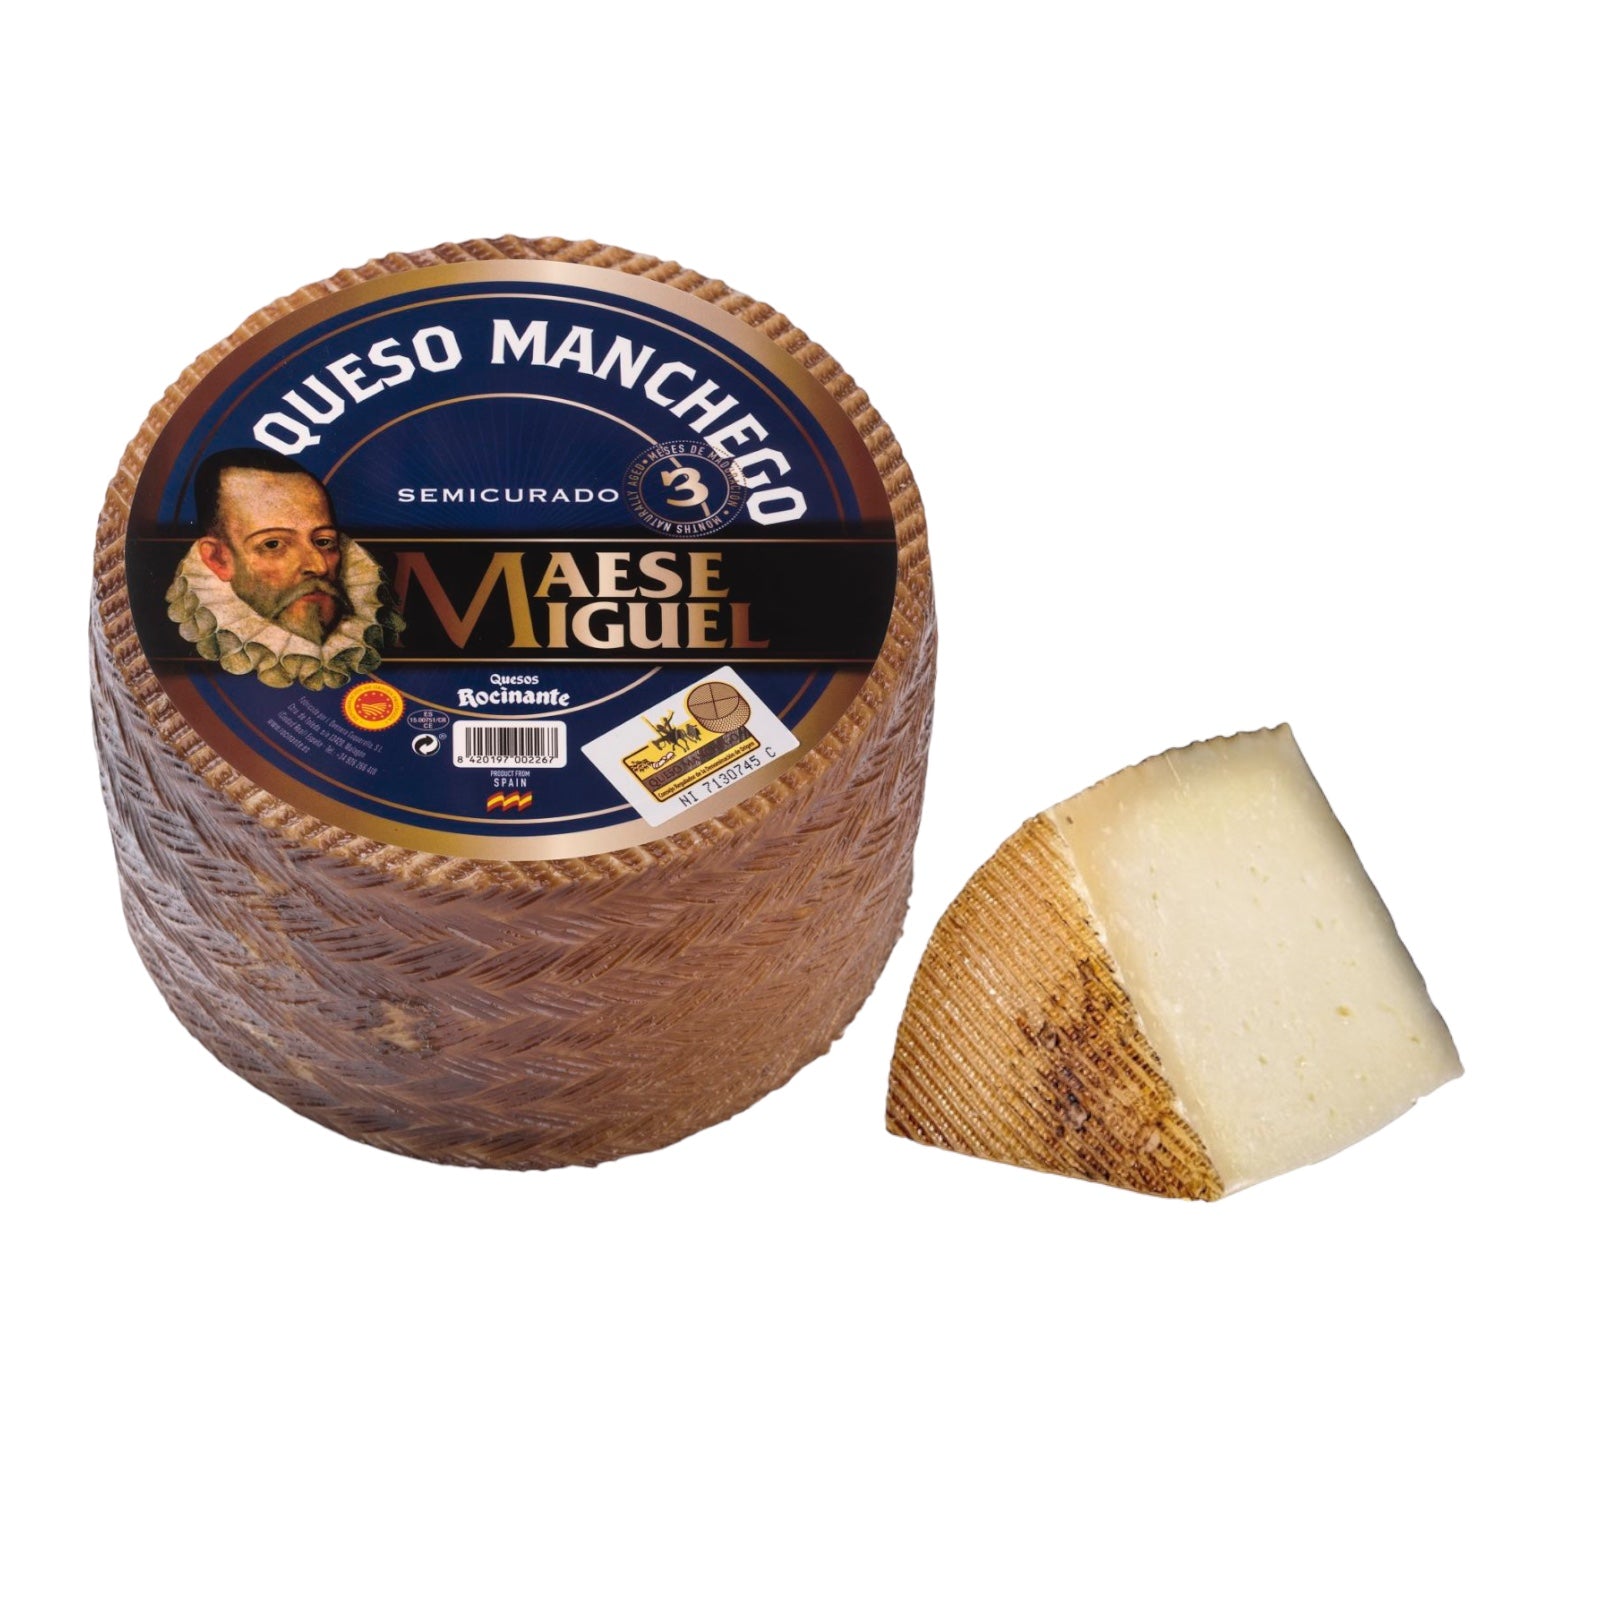 Manchego Cheese DOP Aged 3 Months Aprox. 0.90lb